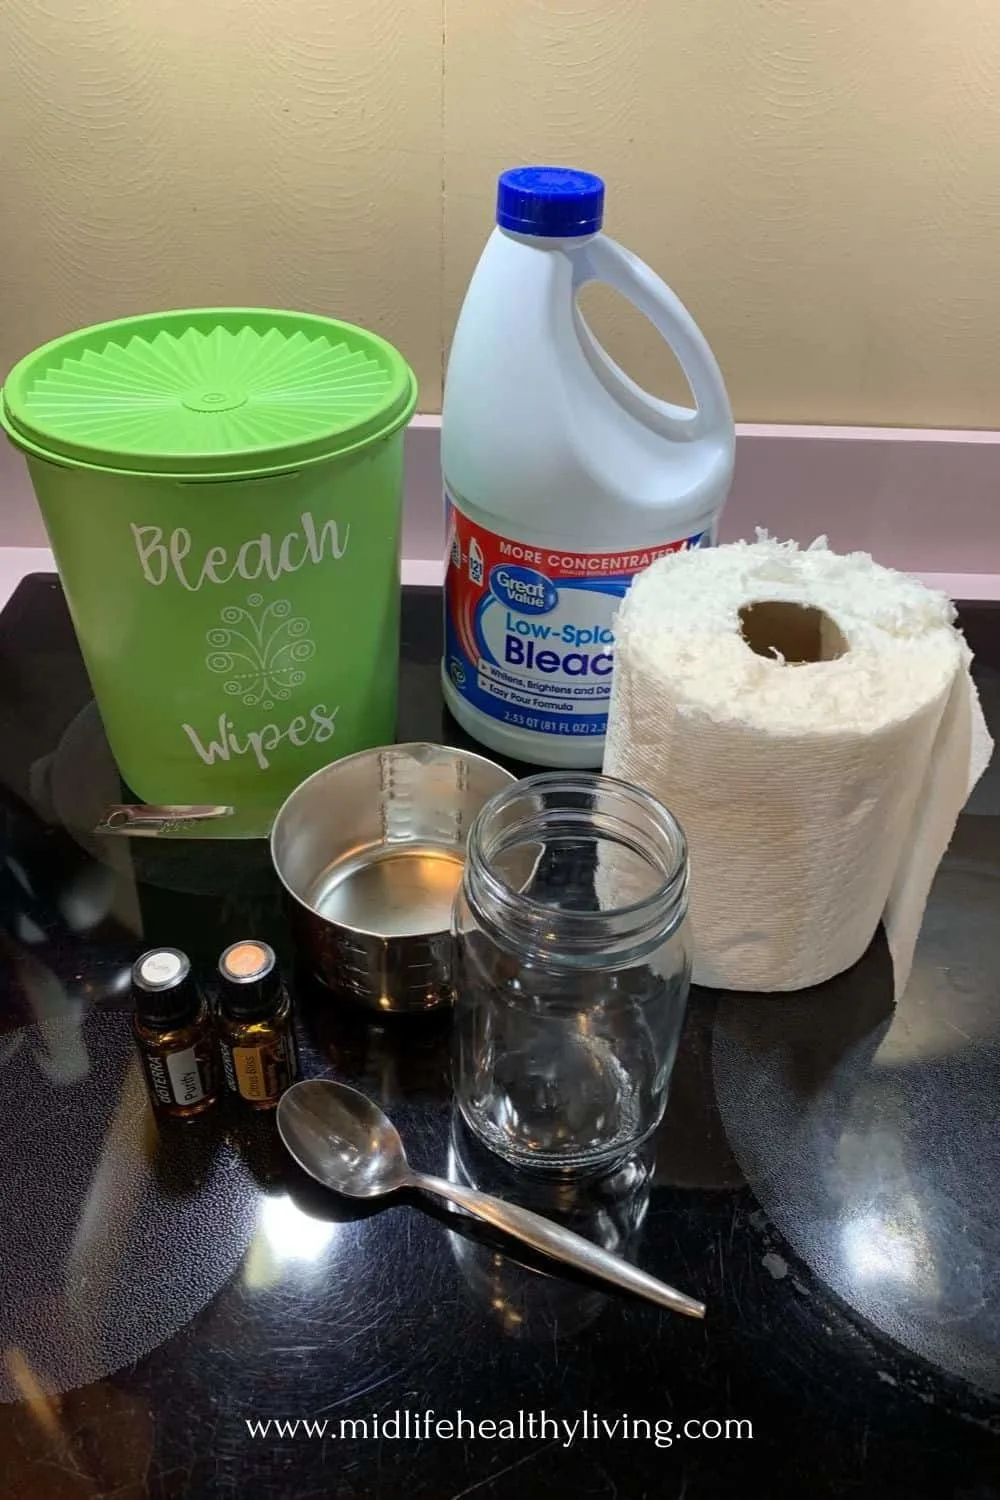 All the ingredients needed to make wipes for cleaning. 